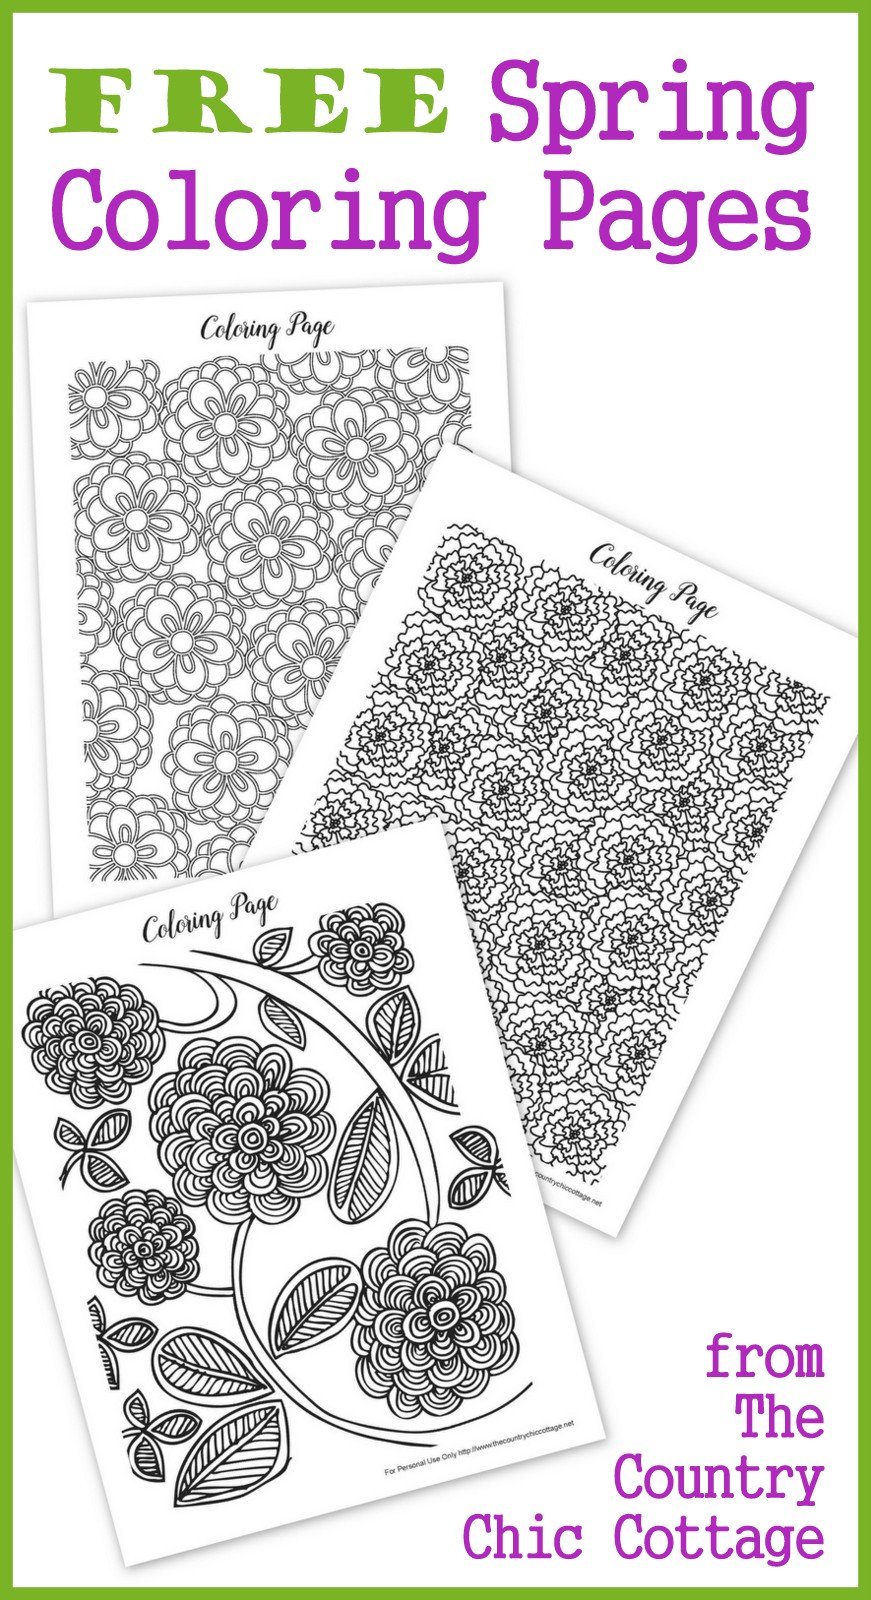 free-spring-coloring-pages-for-adults